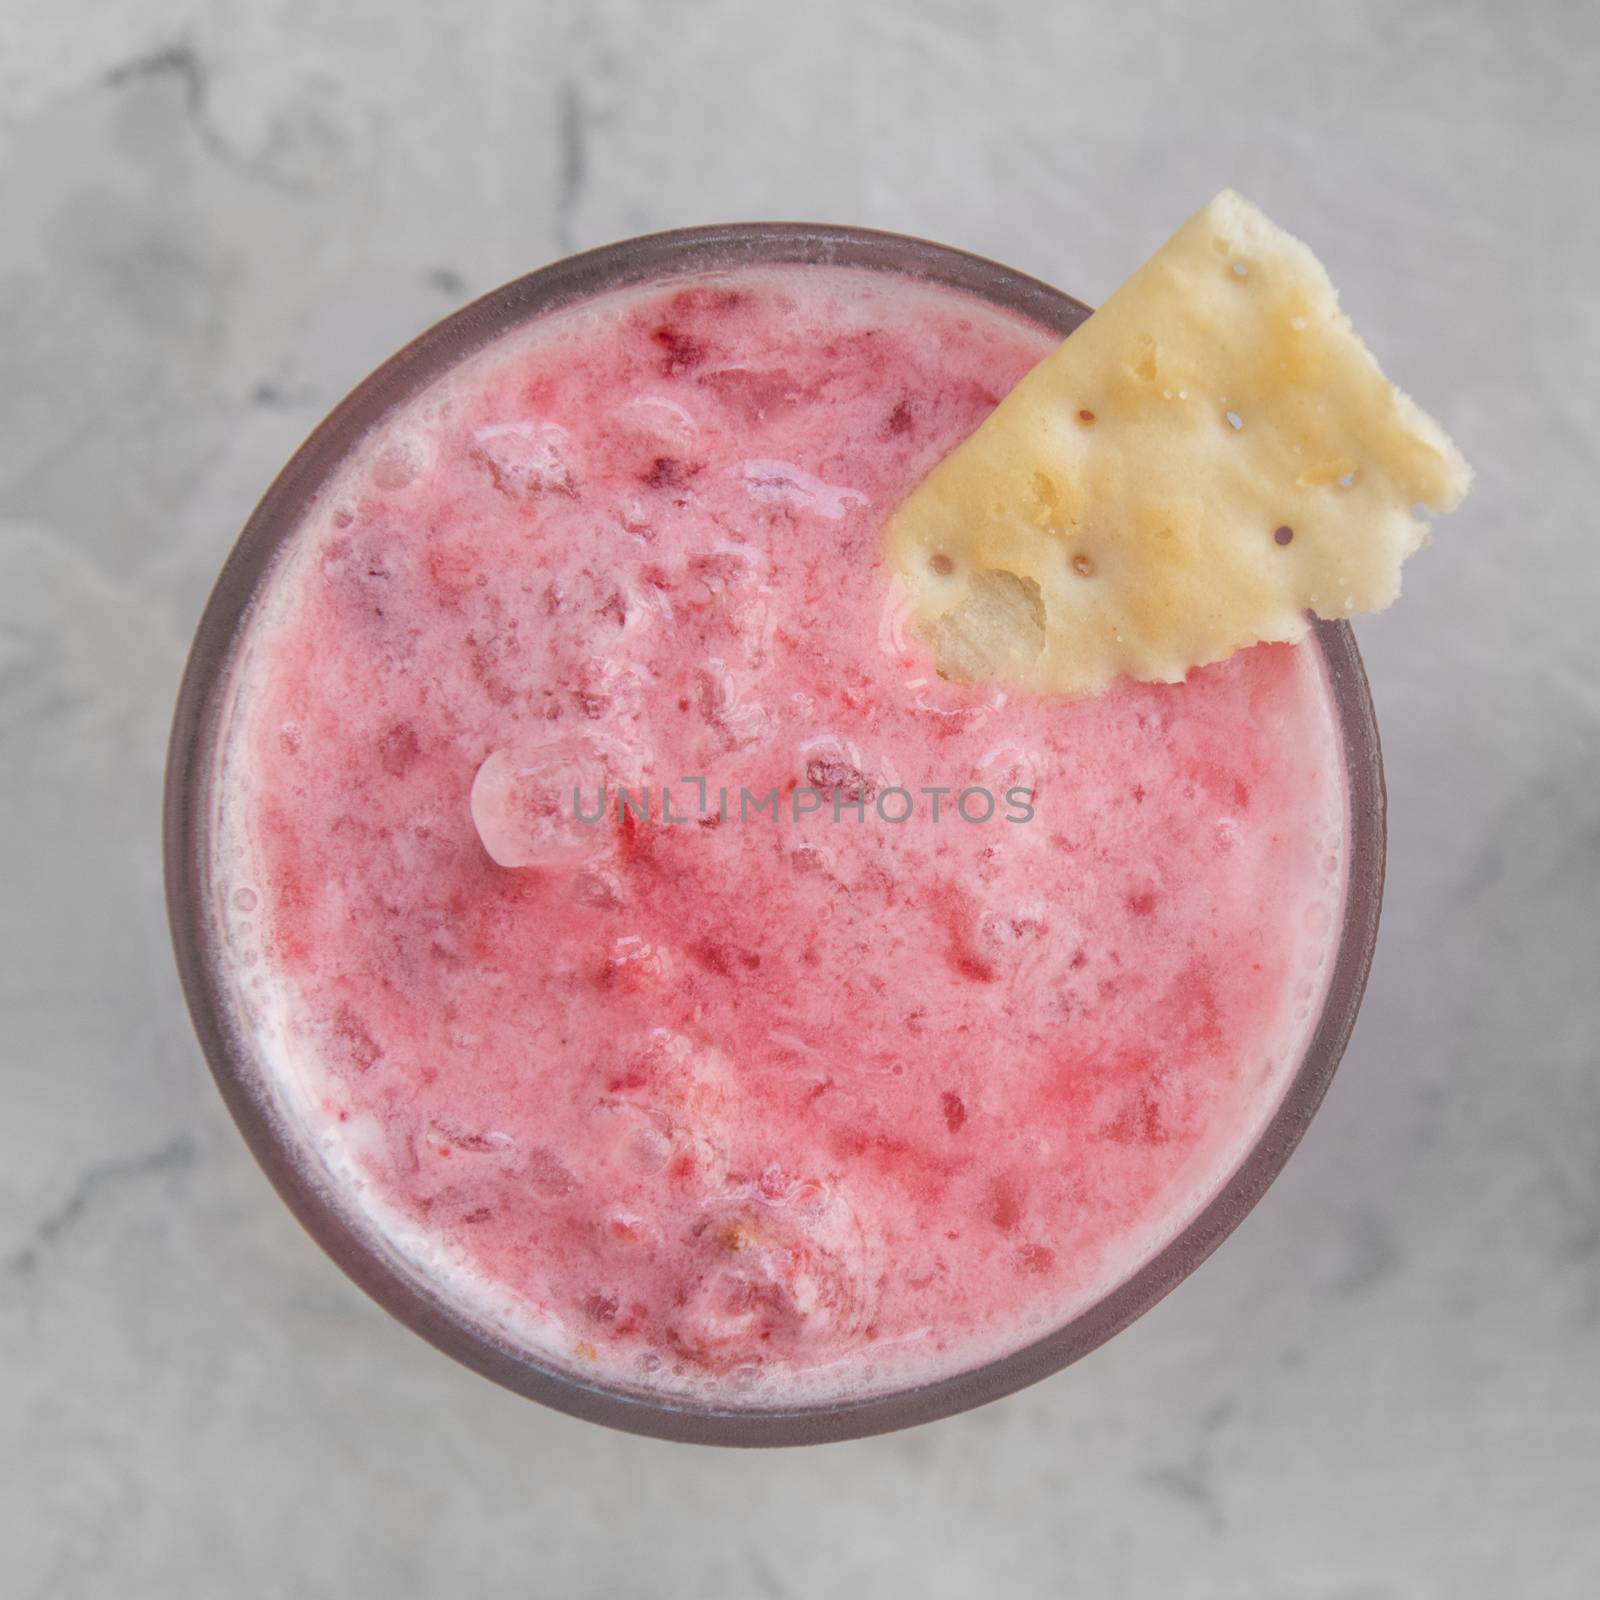 Strawberry smoothie with cookie on a white concrete background. Square cropping